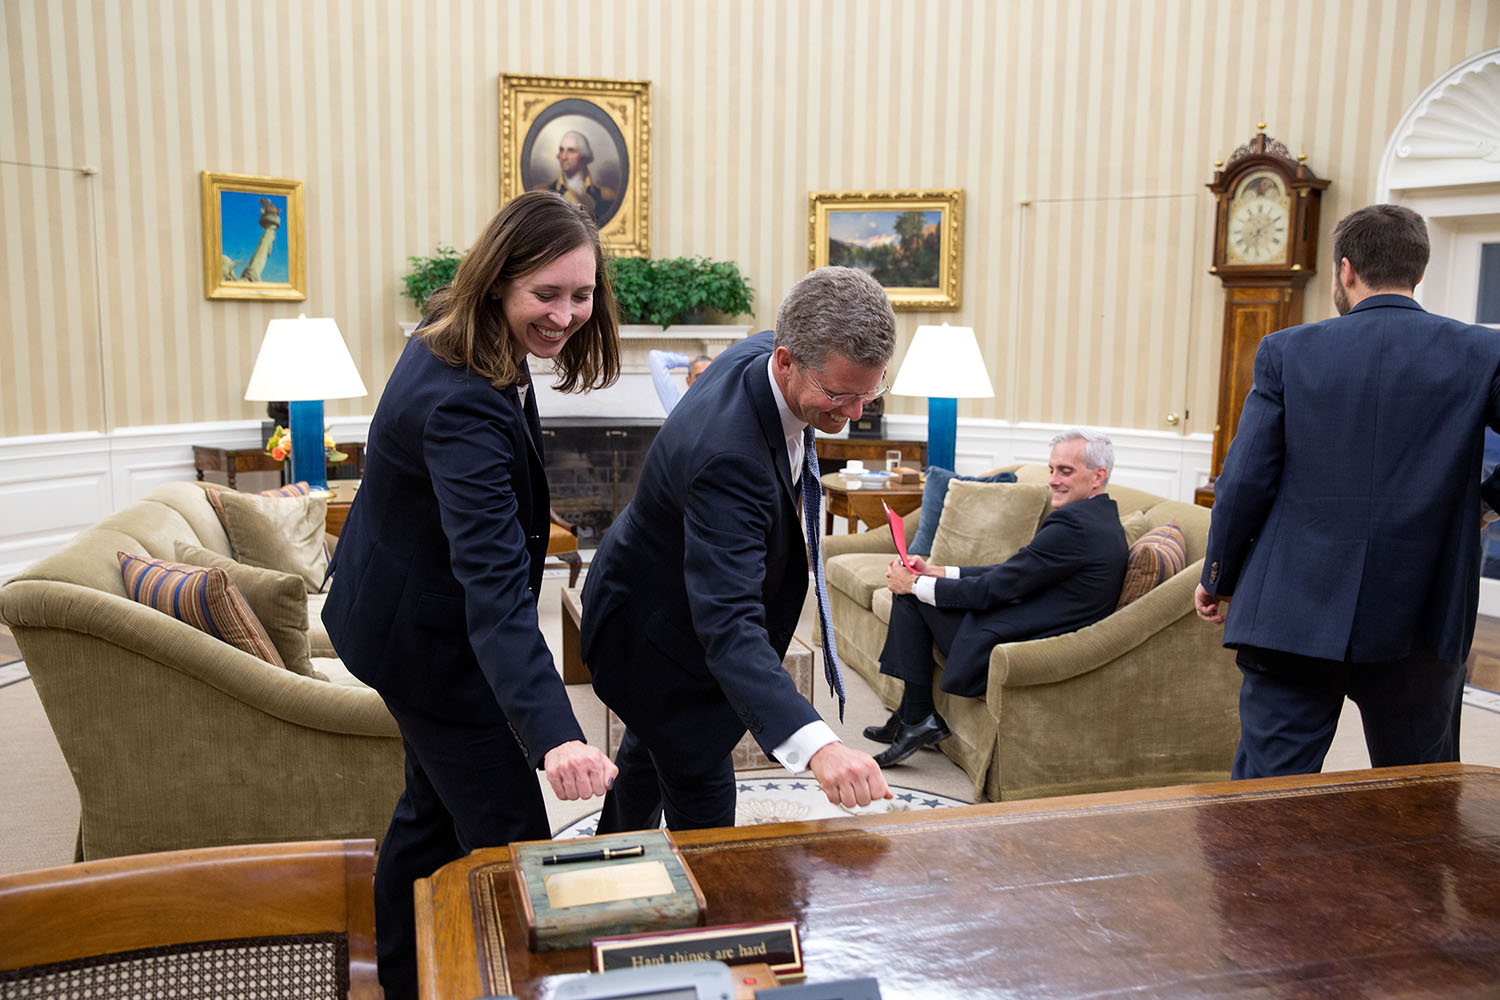 After their meeting with the President, Katie Beirne Fallon, Director of Legislative Affairs, and Shaun Donovan, Director Office of Management and Budget, knock on wood–the Resolute Desk–in hopes that the budget would pass through Congress.